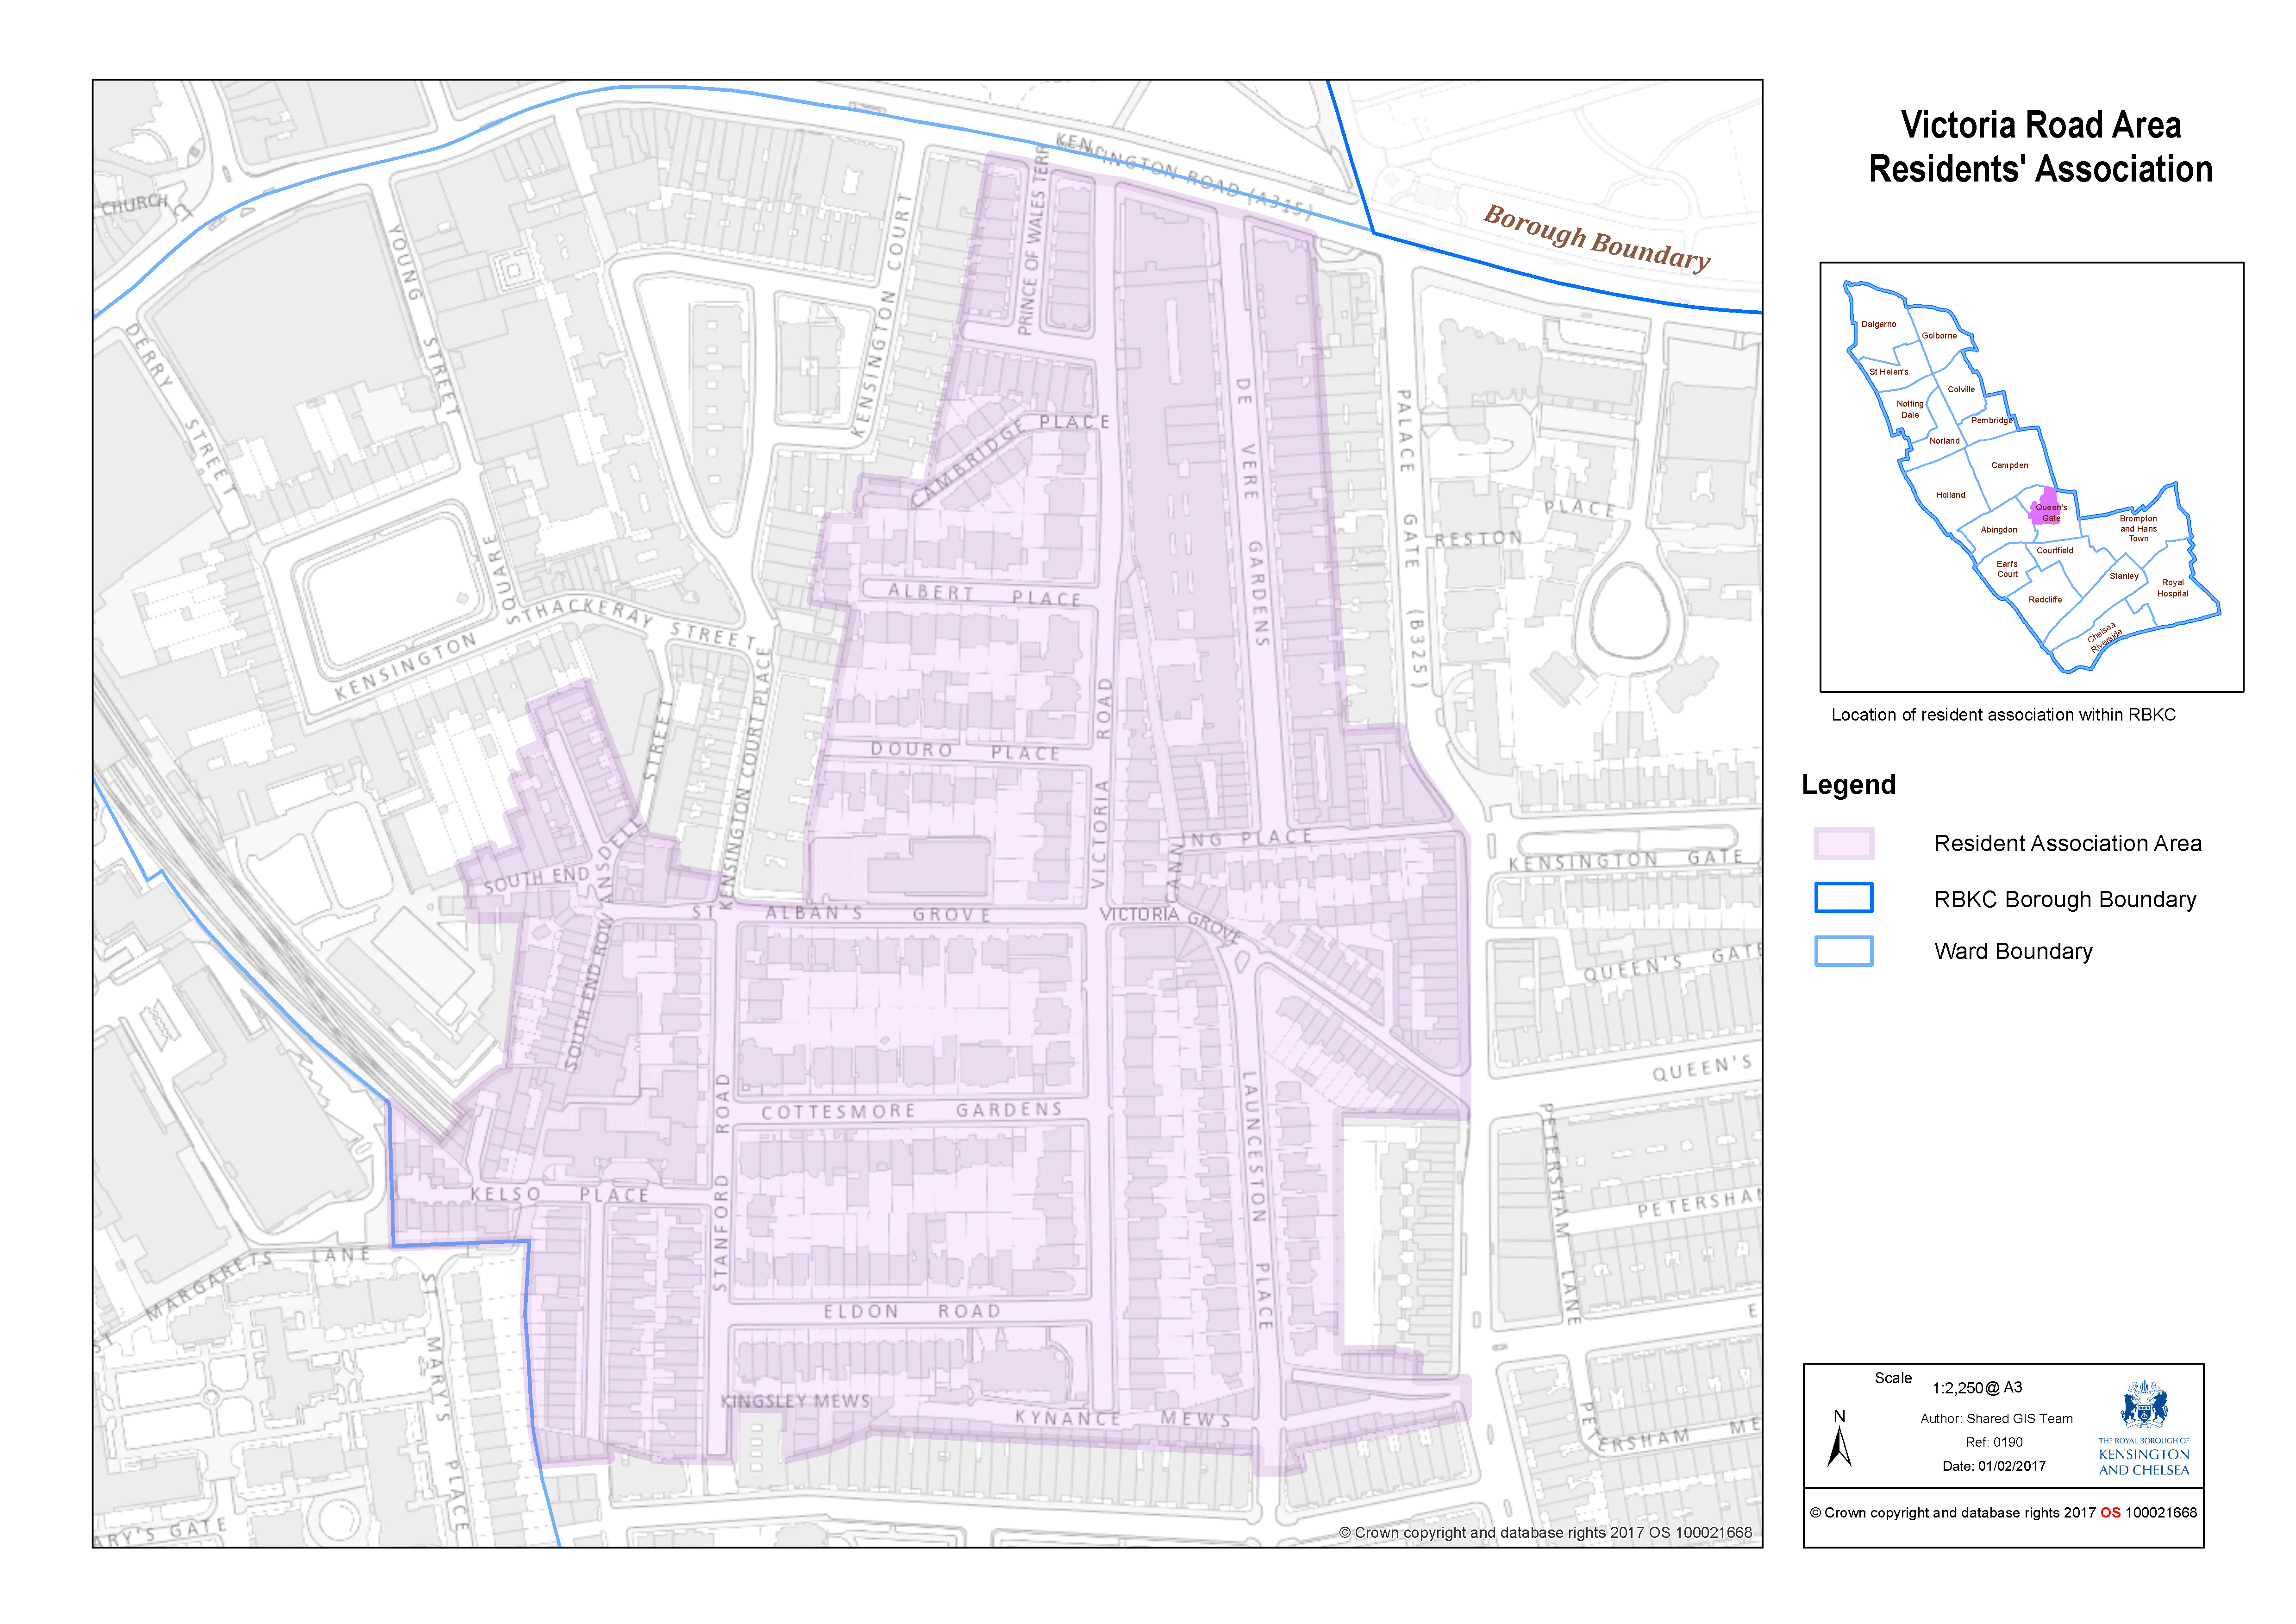 Map of the Victoria Road Area